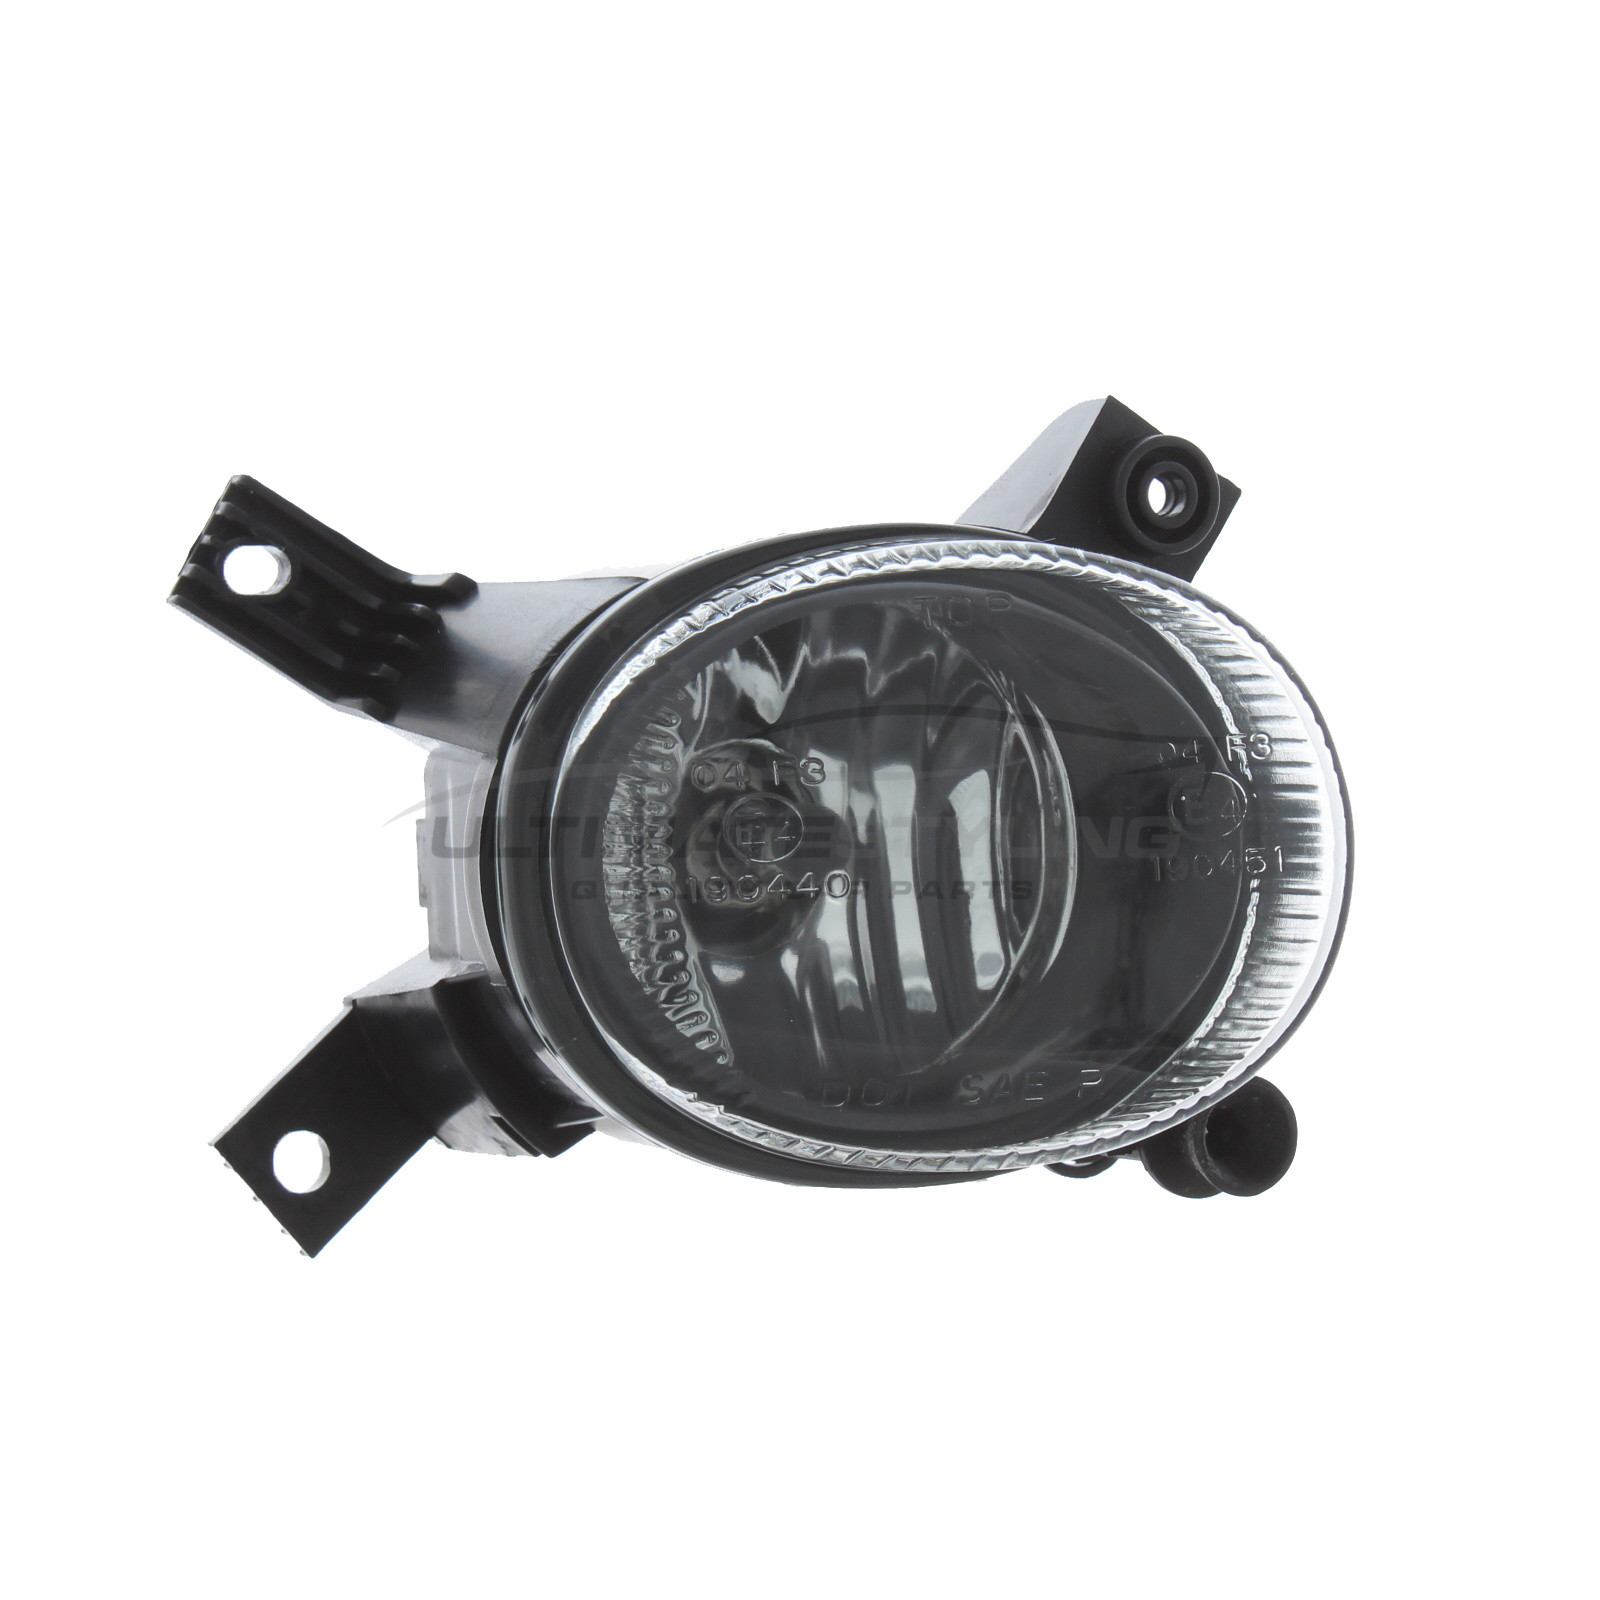 Audi A3 / A4 / RS3 / RS4 / S3 / S4 Front Fog Light - Drivers Side (RH) - Non-LED